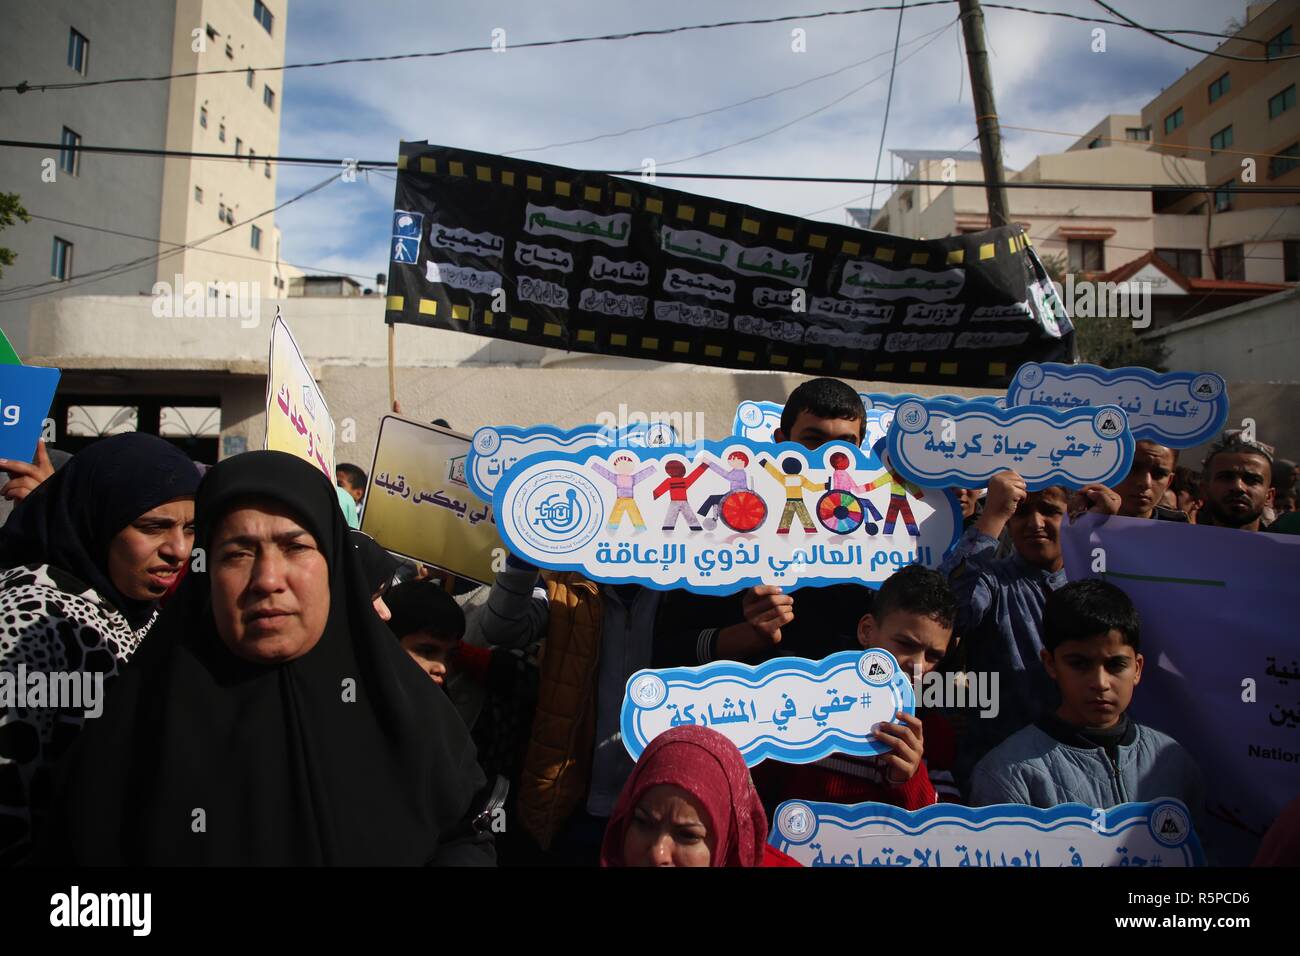 Gaza City, The Gaza Strip, Palestine. 2nd Dec, 2018. Disabled Palestinians take part taking part in rally in front of the UN quarter in Gaza city demanding the protection of disabled rights. Credit: Hassan Jedi/Quds Net News/ZUMA Wire/Alamy Live News Stock Photo